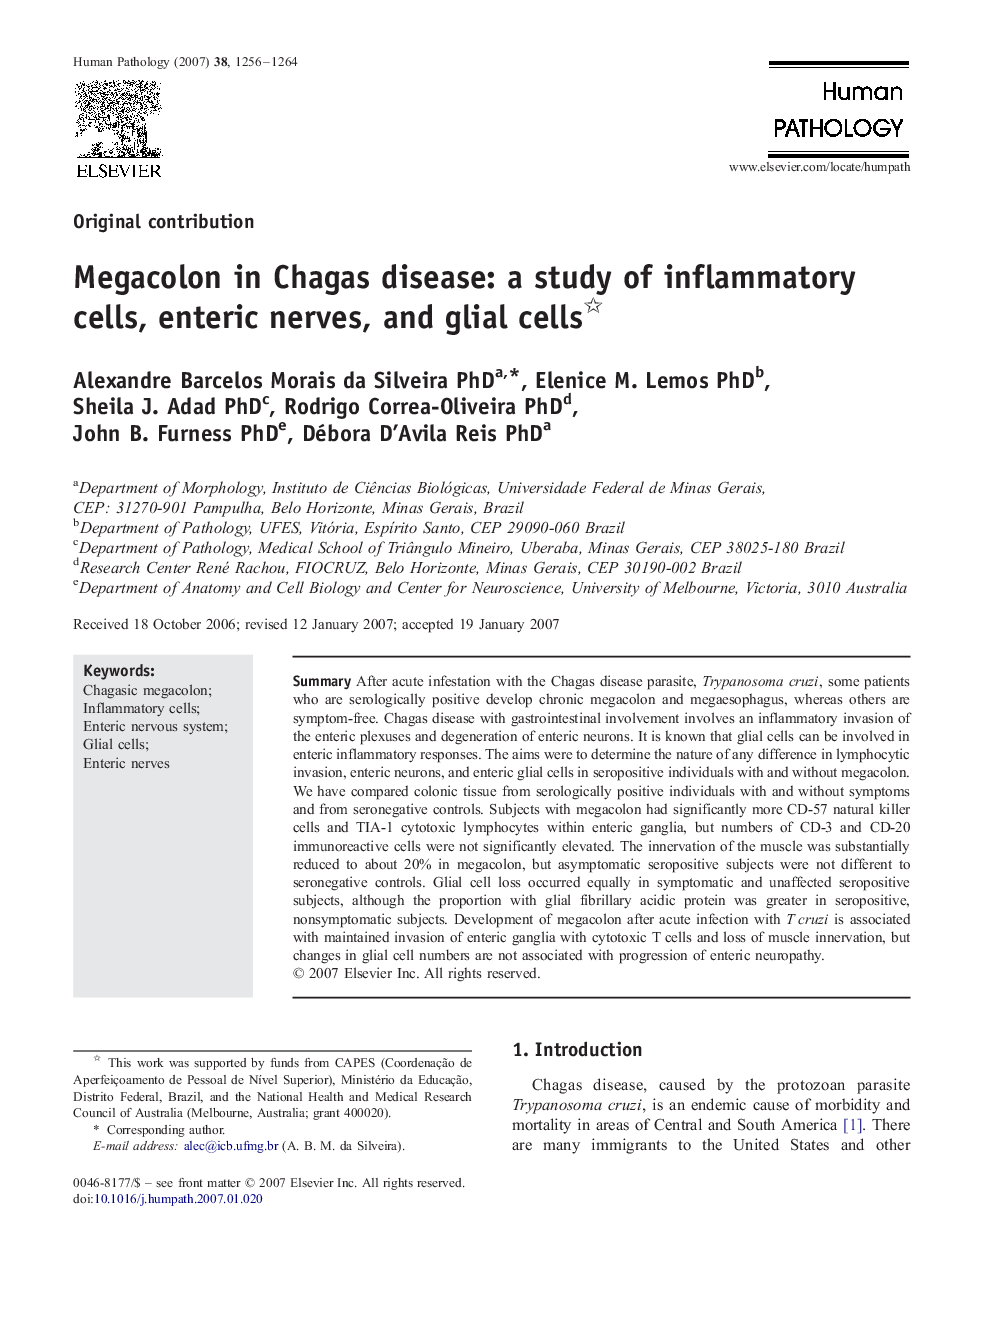 Megacolon in Chagas disease: a study of inflammatory cells, enteric nerves, and glial cells 